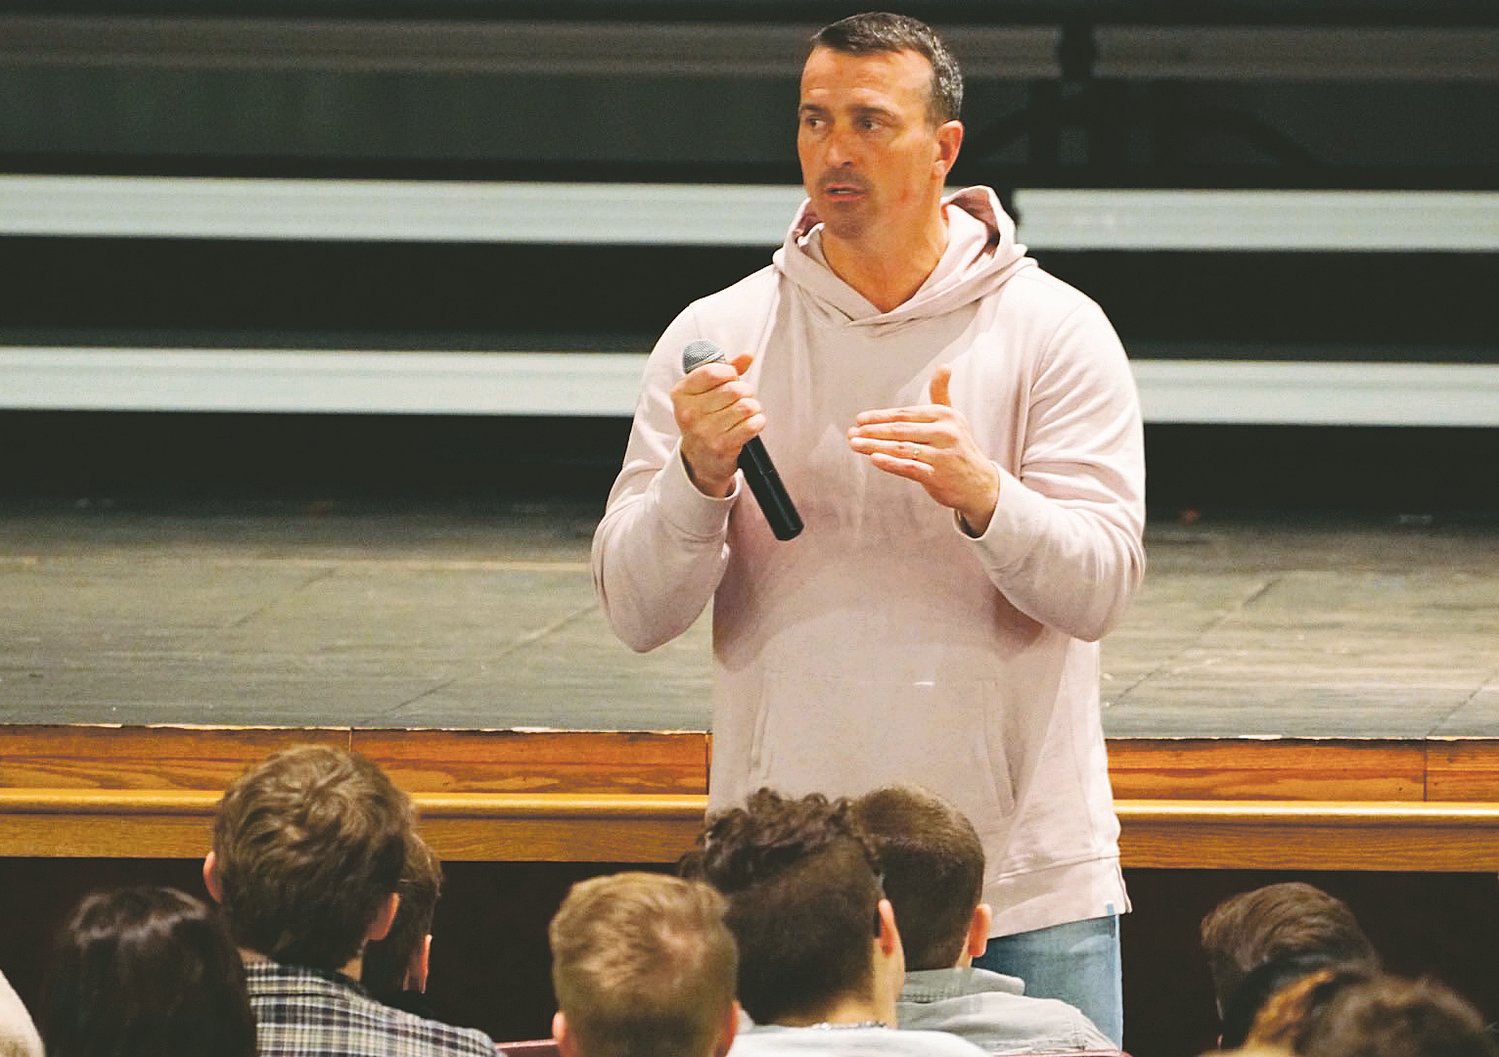 Former NBA player Chris Herren speaks to a group of students at Southmont High School on Wednesday about drug addiction and substance abuse and recovery. He has been sober for almost 12 years after a lifelong battle with drug and alcohol abuse.